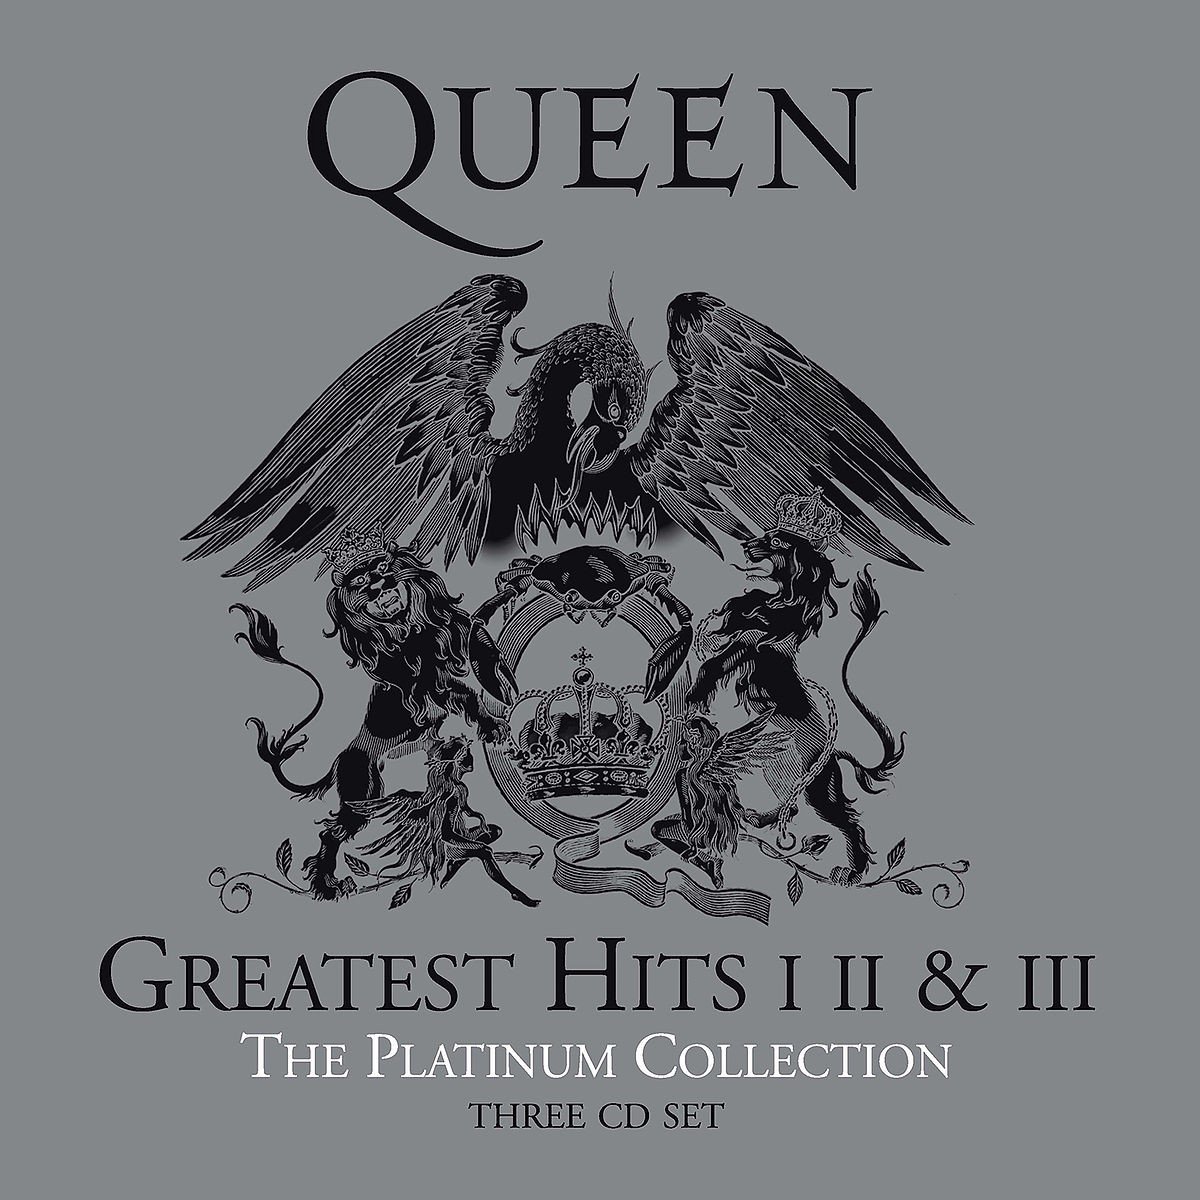 Queen - The Platinum Collection (3 CD) (Remastered 2011) - Queen